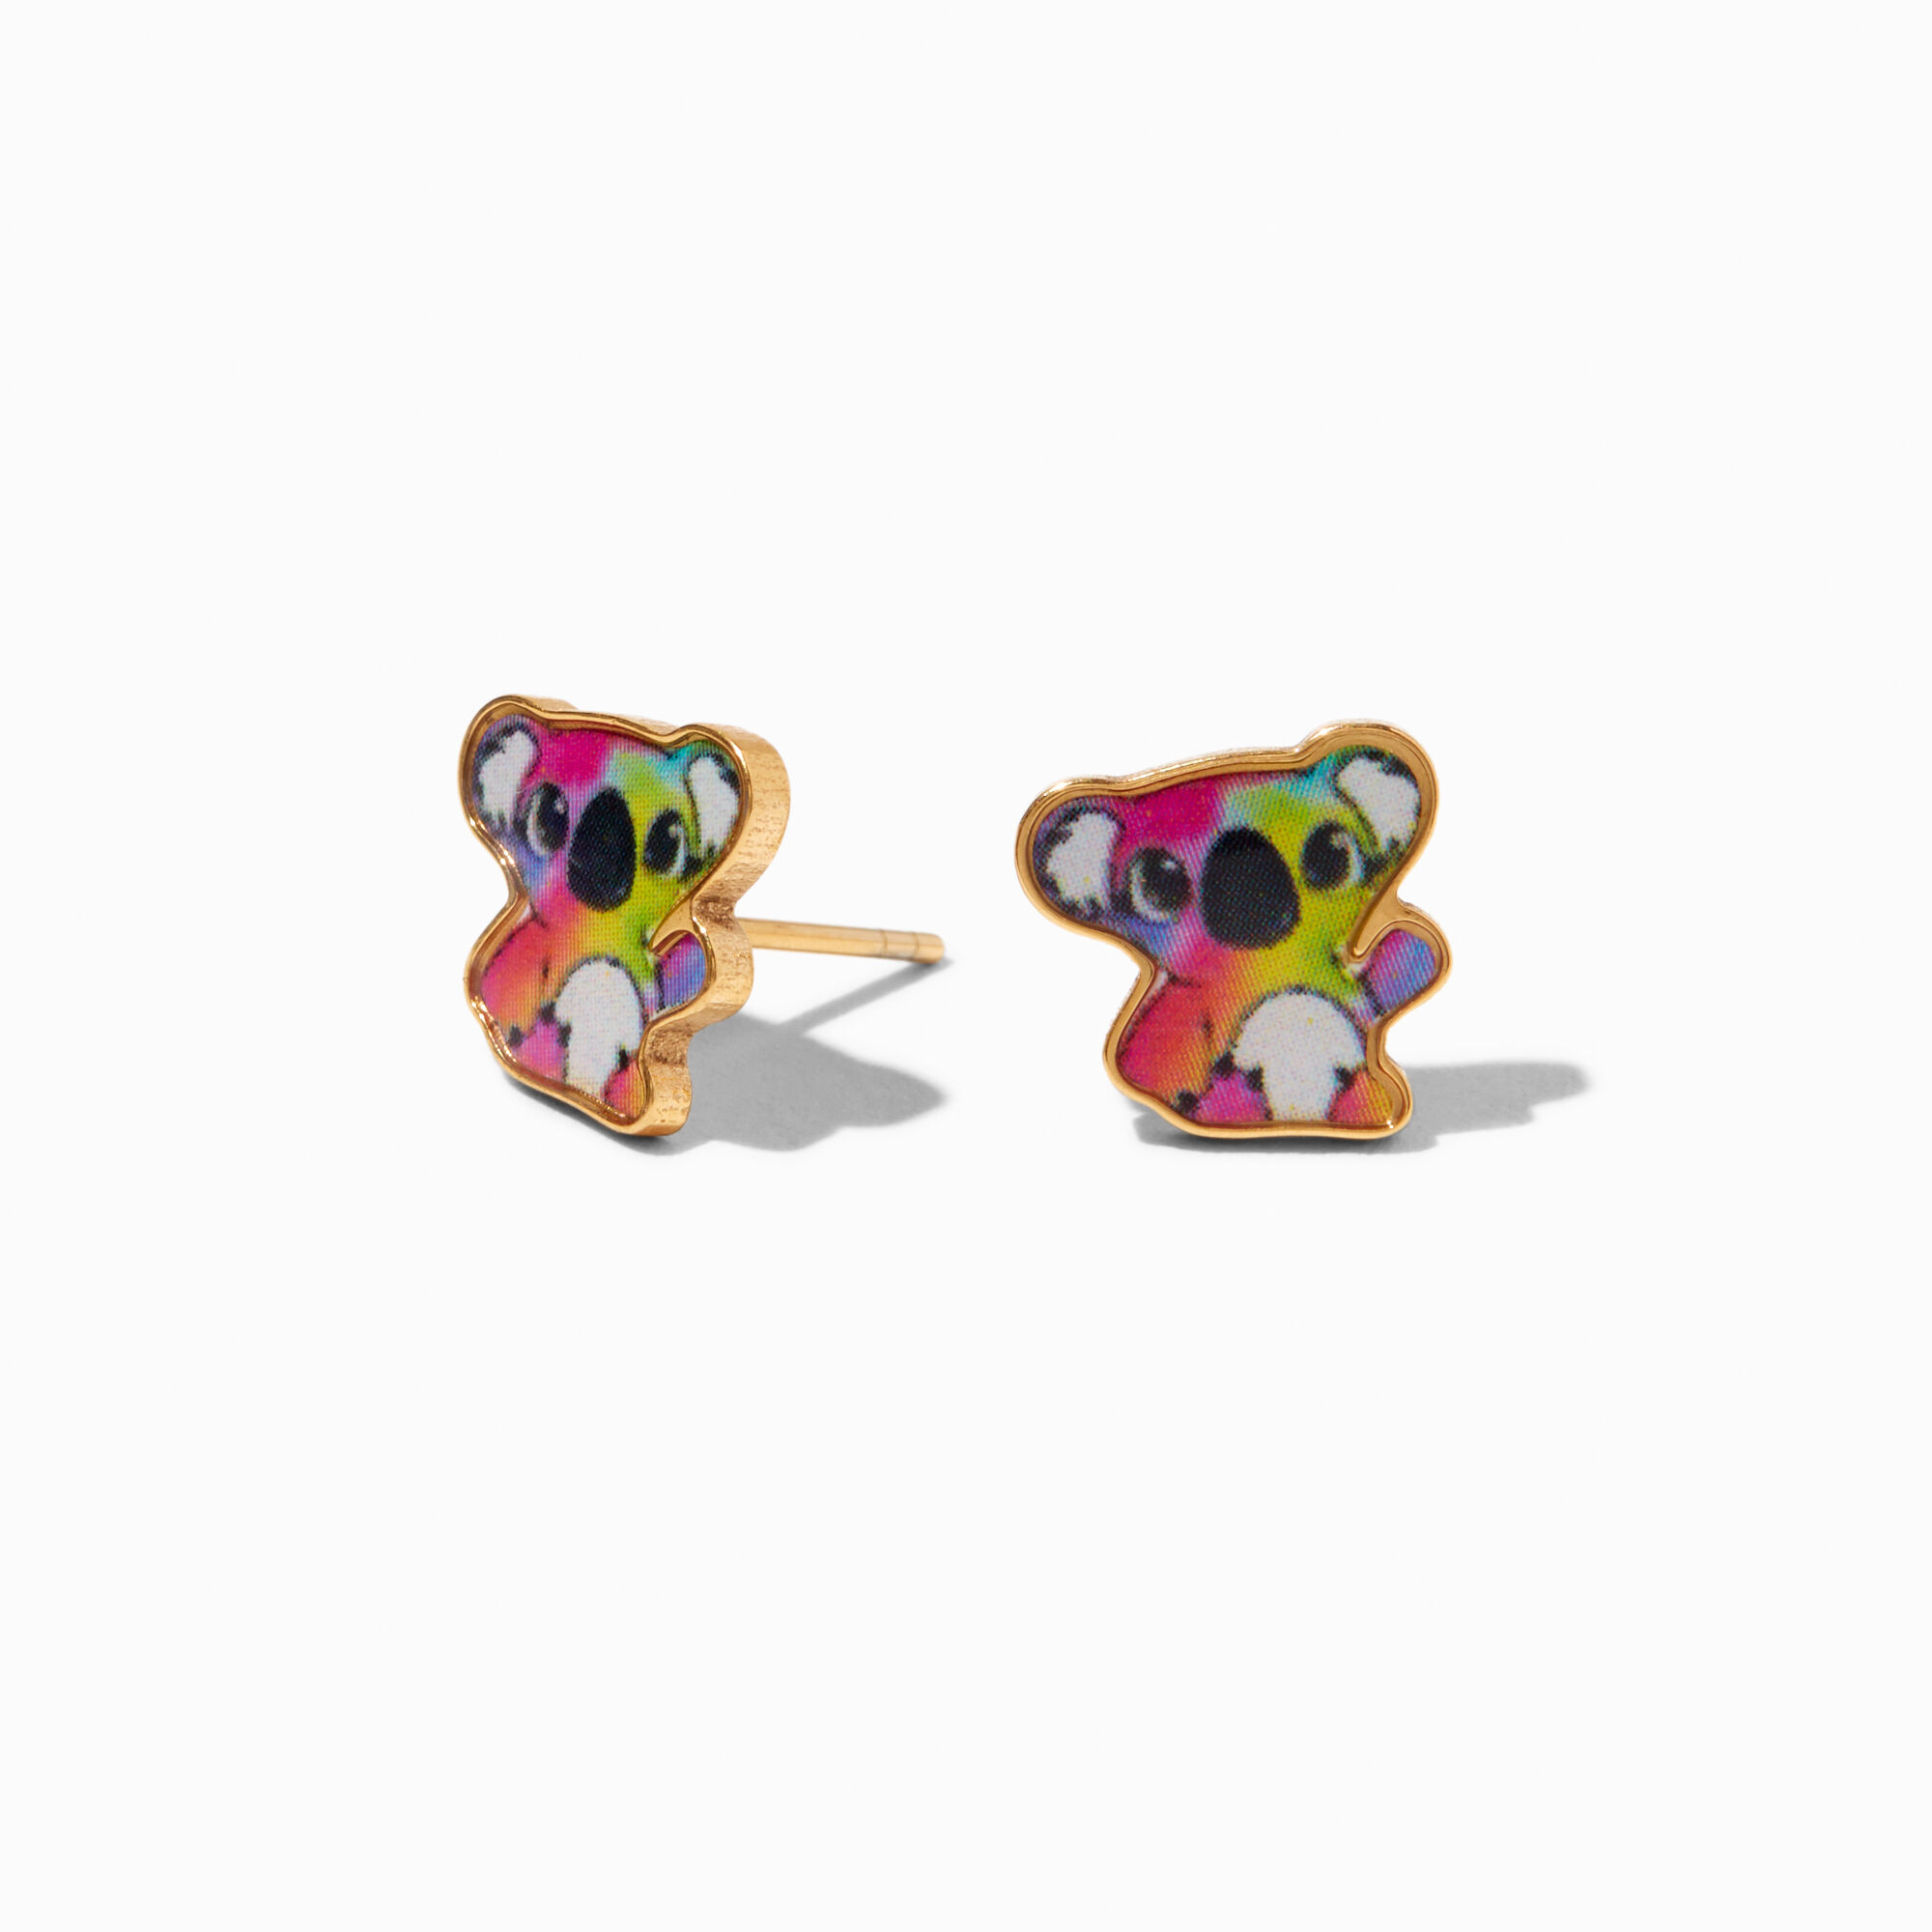 View Claires Titanium Kylie The Koala Stud Earrings Gold information